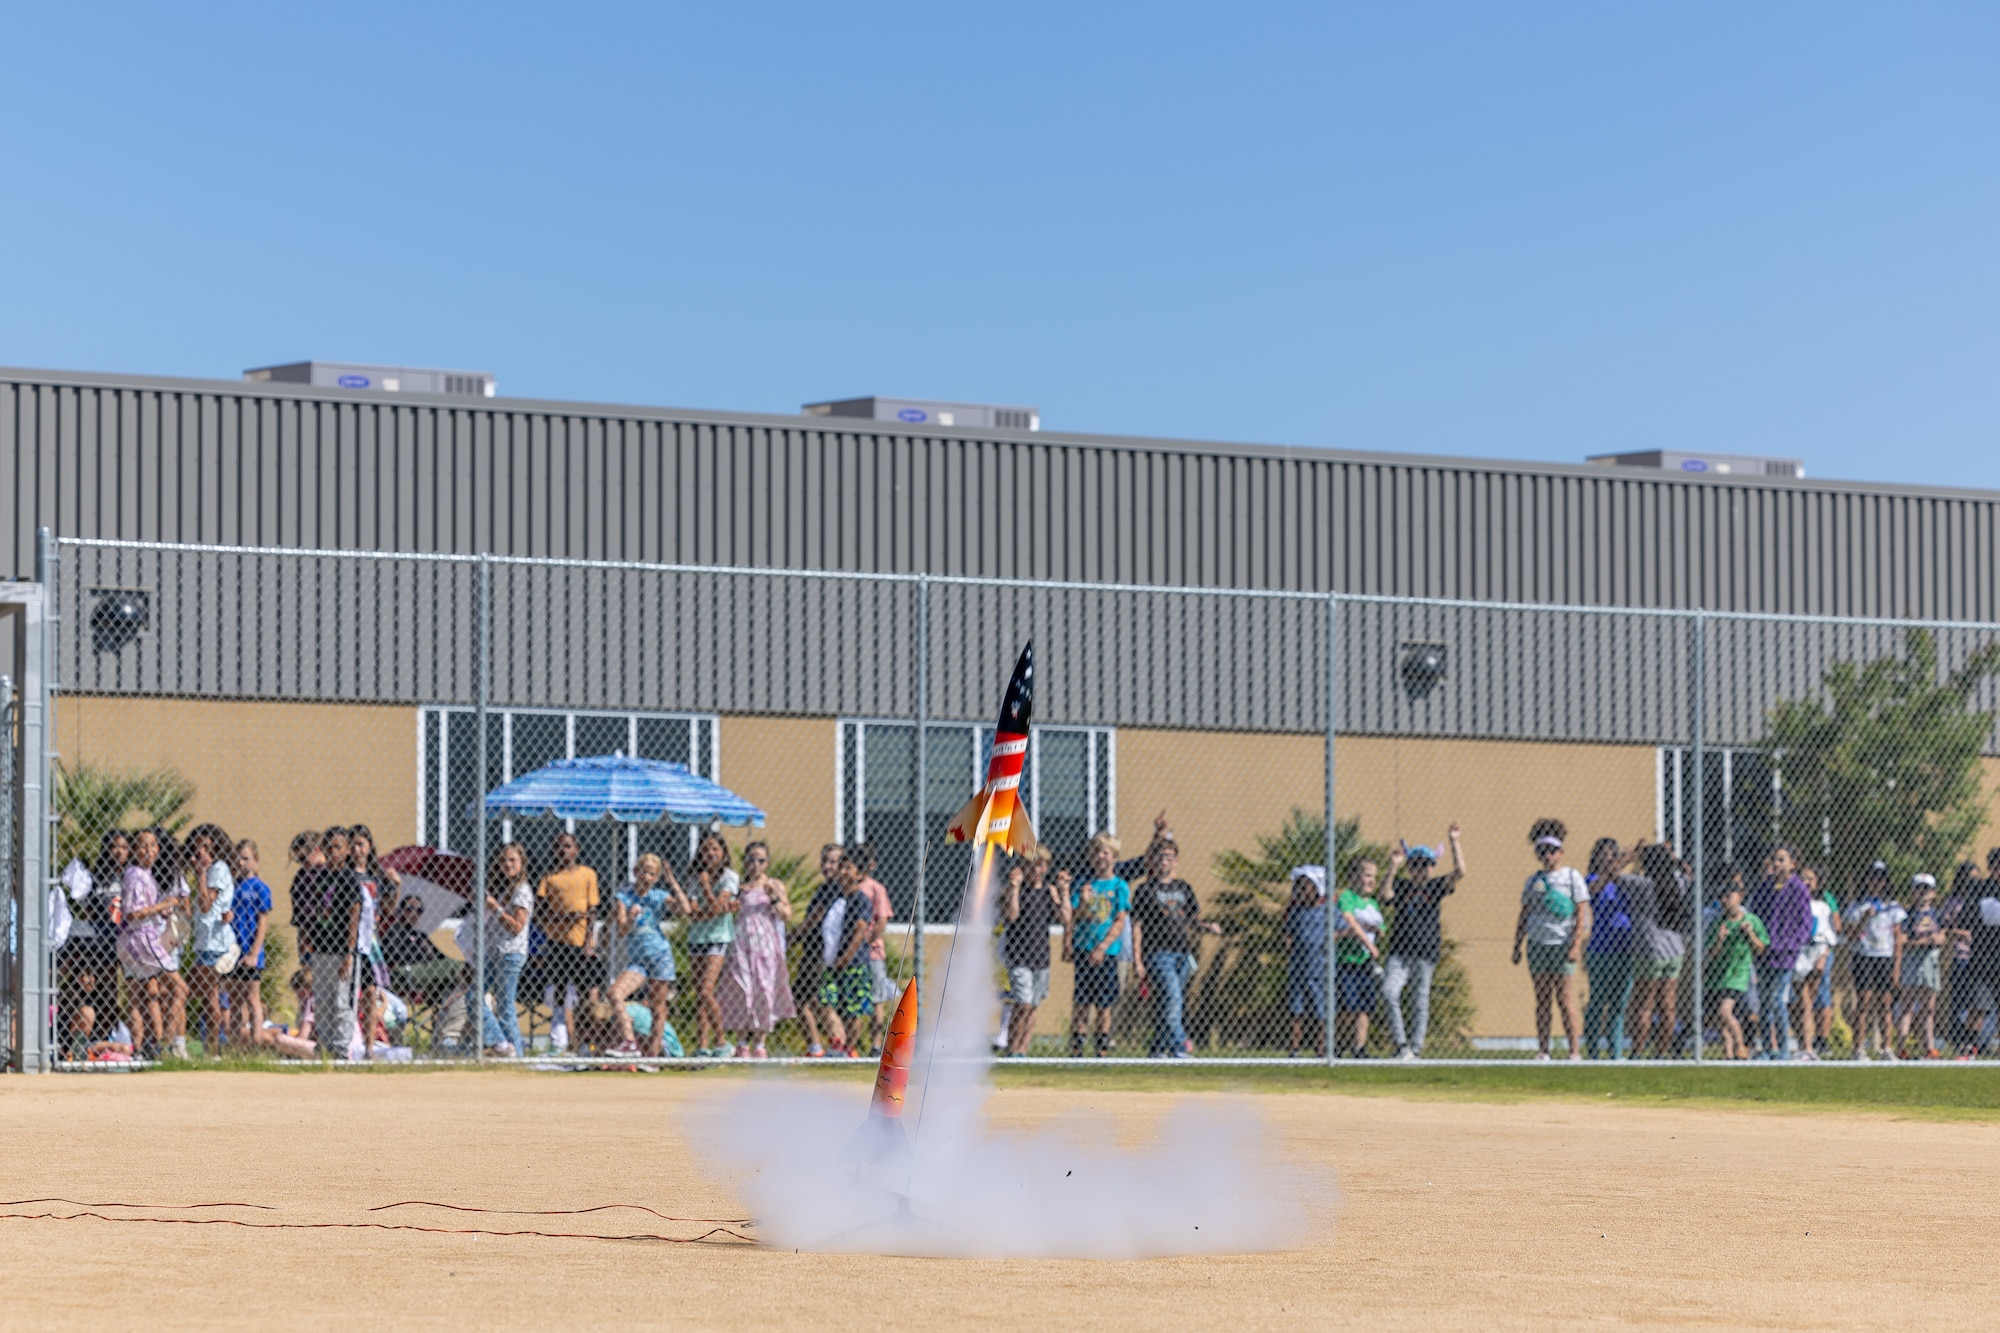 Students at Irving Branch Elementary School on Edwards AFB built, painted and launched 12 rockets as part of a practical science, technology, engineering and mathematics project. This hands-on experience allows the student to extend what they have learned in the classroom to the real world.